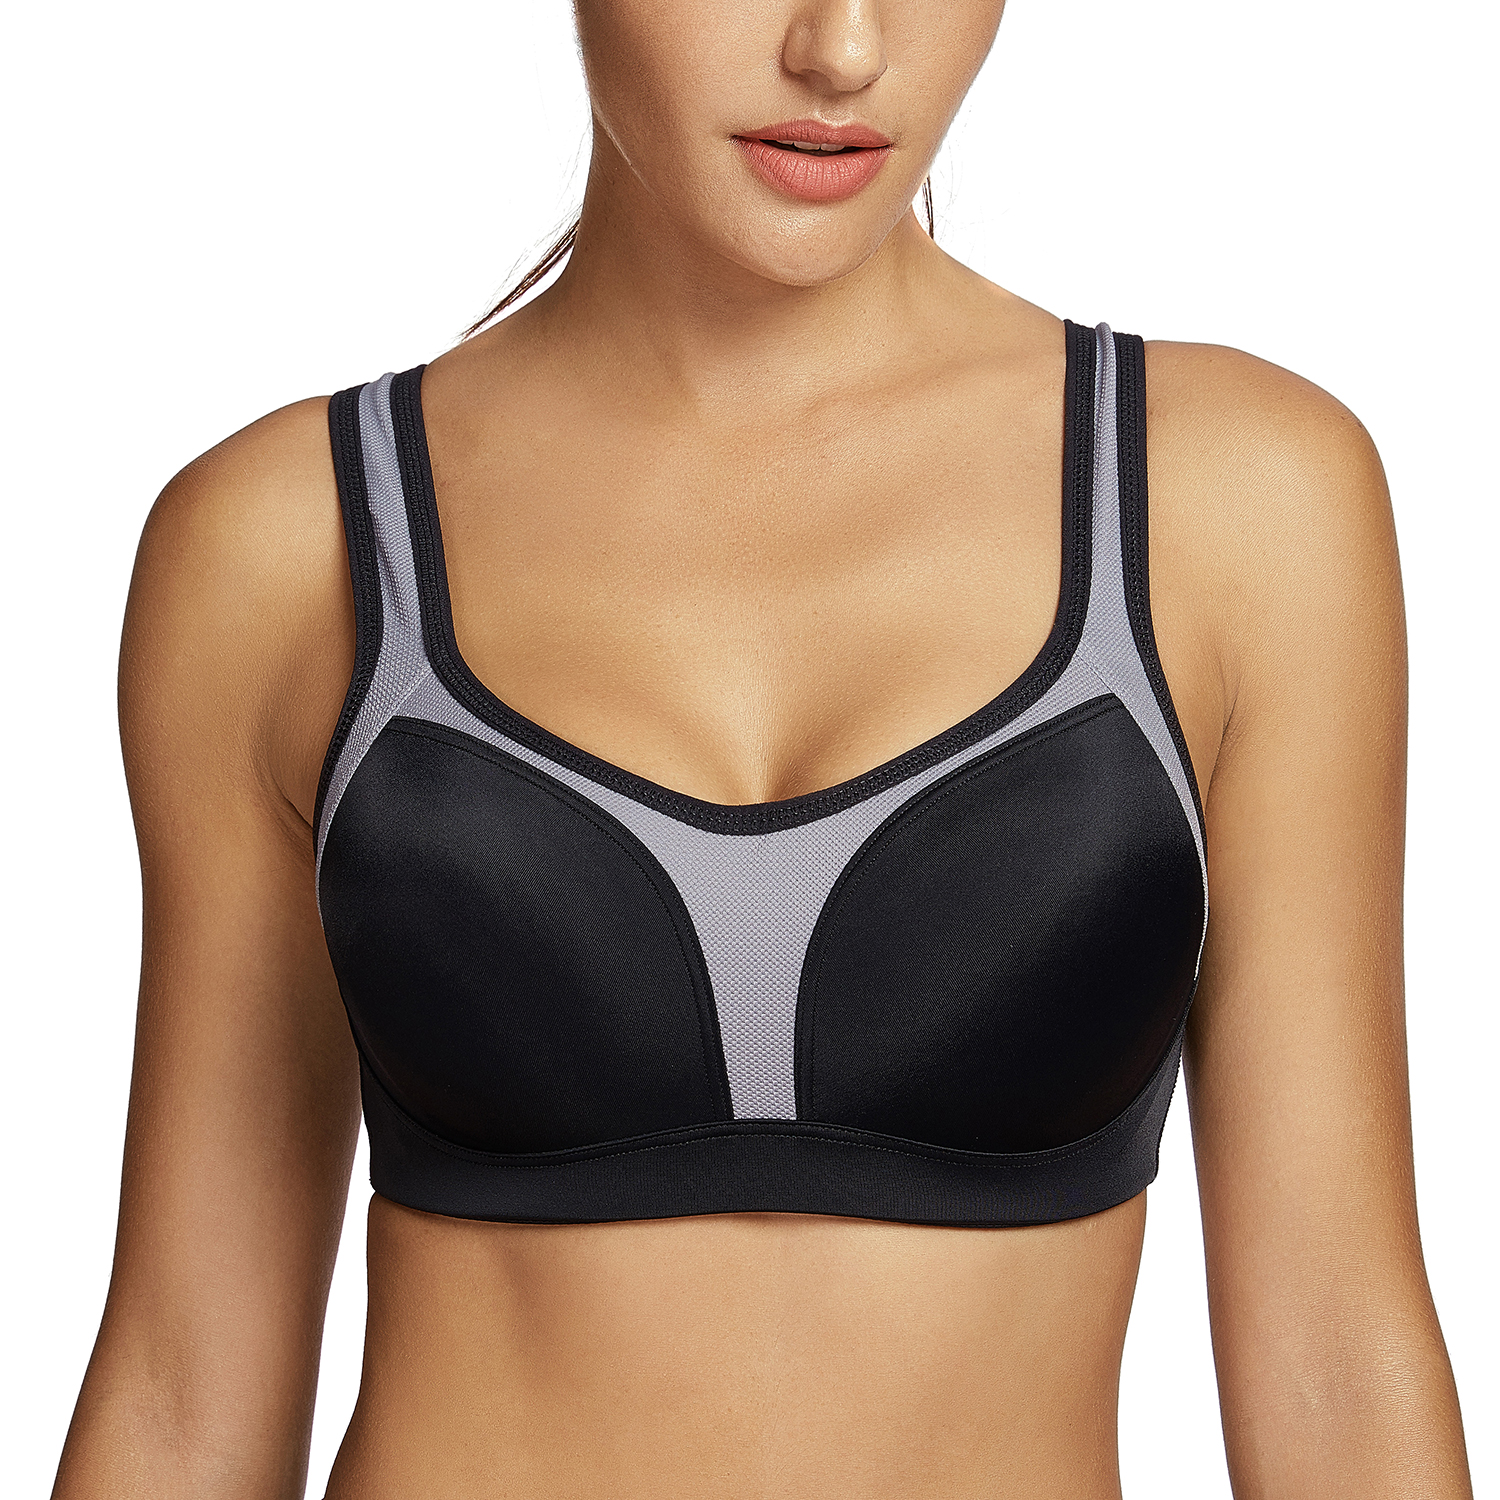 SYROKAN Women's High Impact Sports Bra Underwire Firm Support Contour Padded